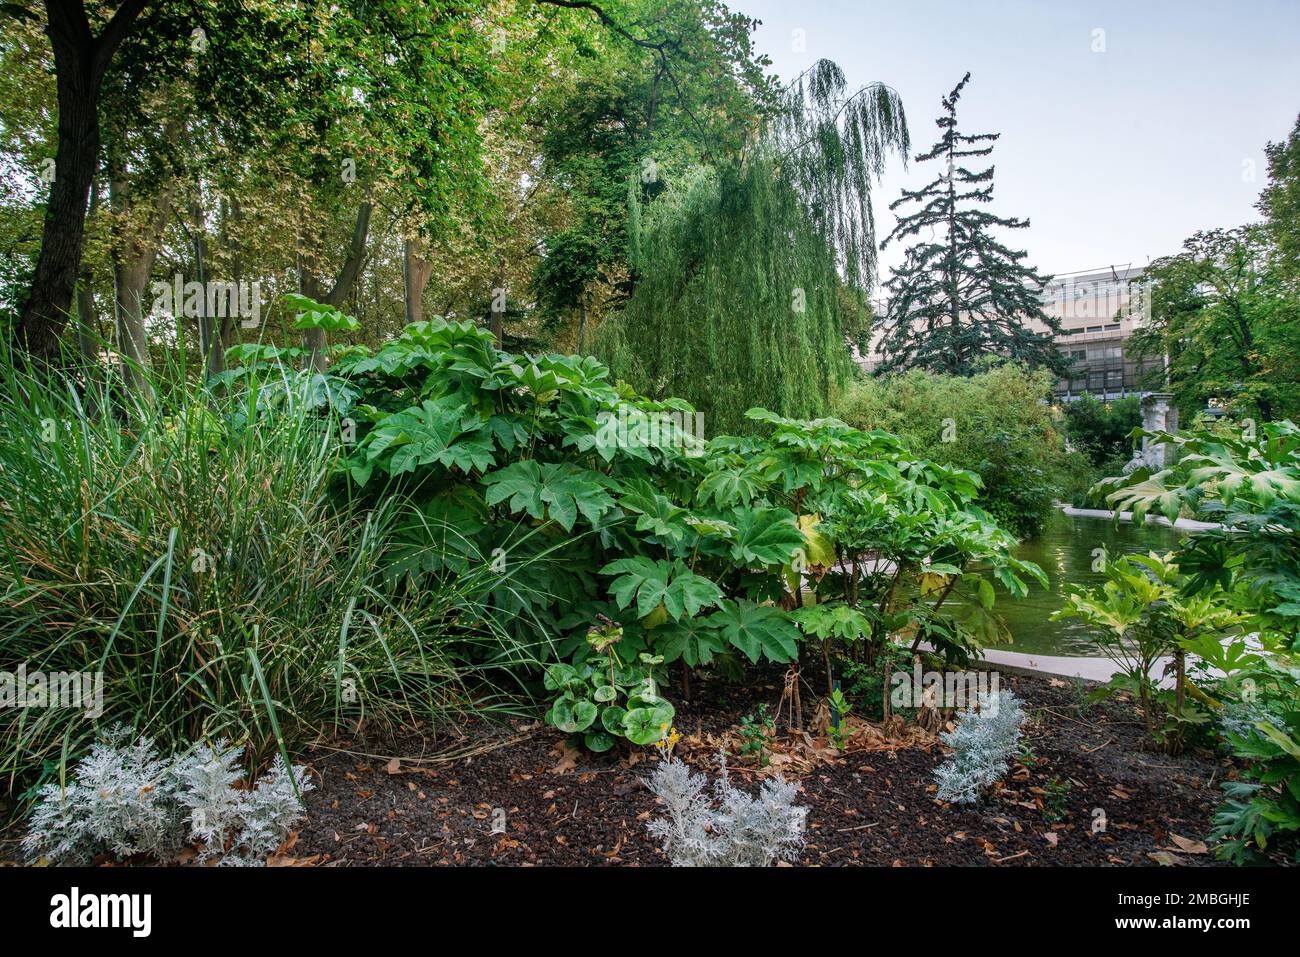 Amazing garden of the Palais des Congrès in Perpignan with Lebanese cedar and weeping willow and Tetrapanax shrubs and a pond Stock Photo